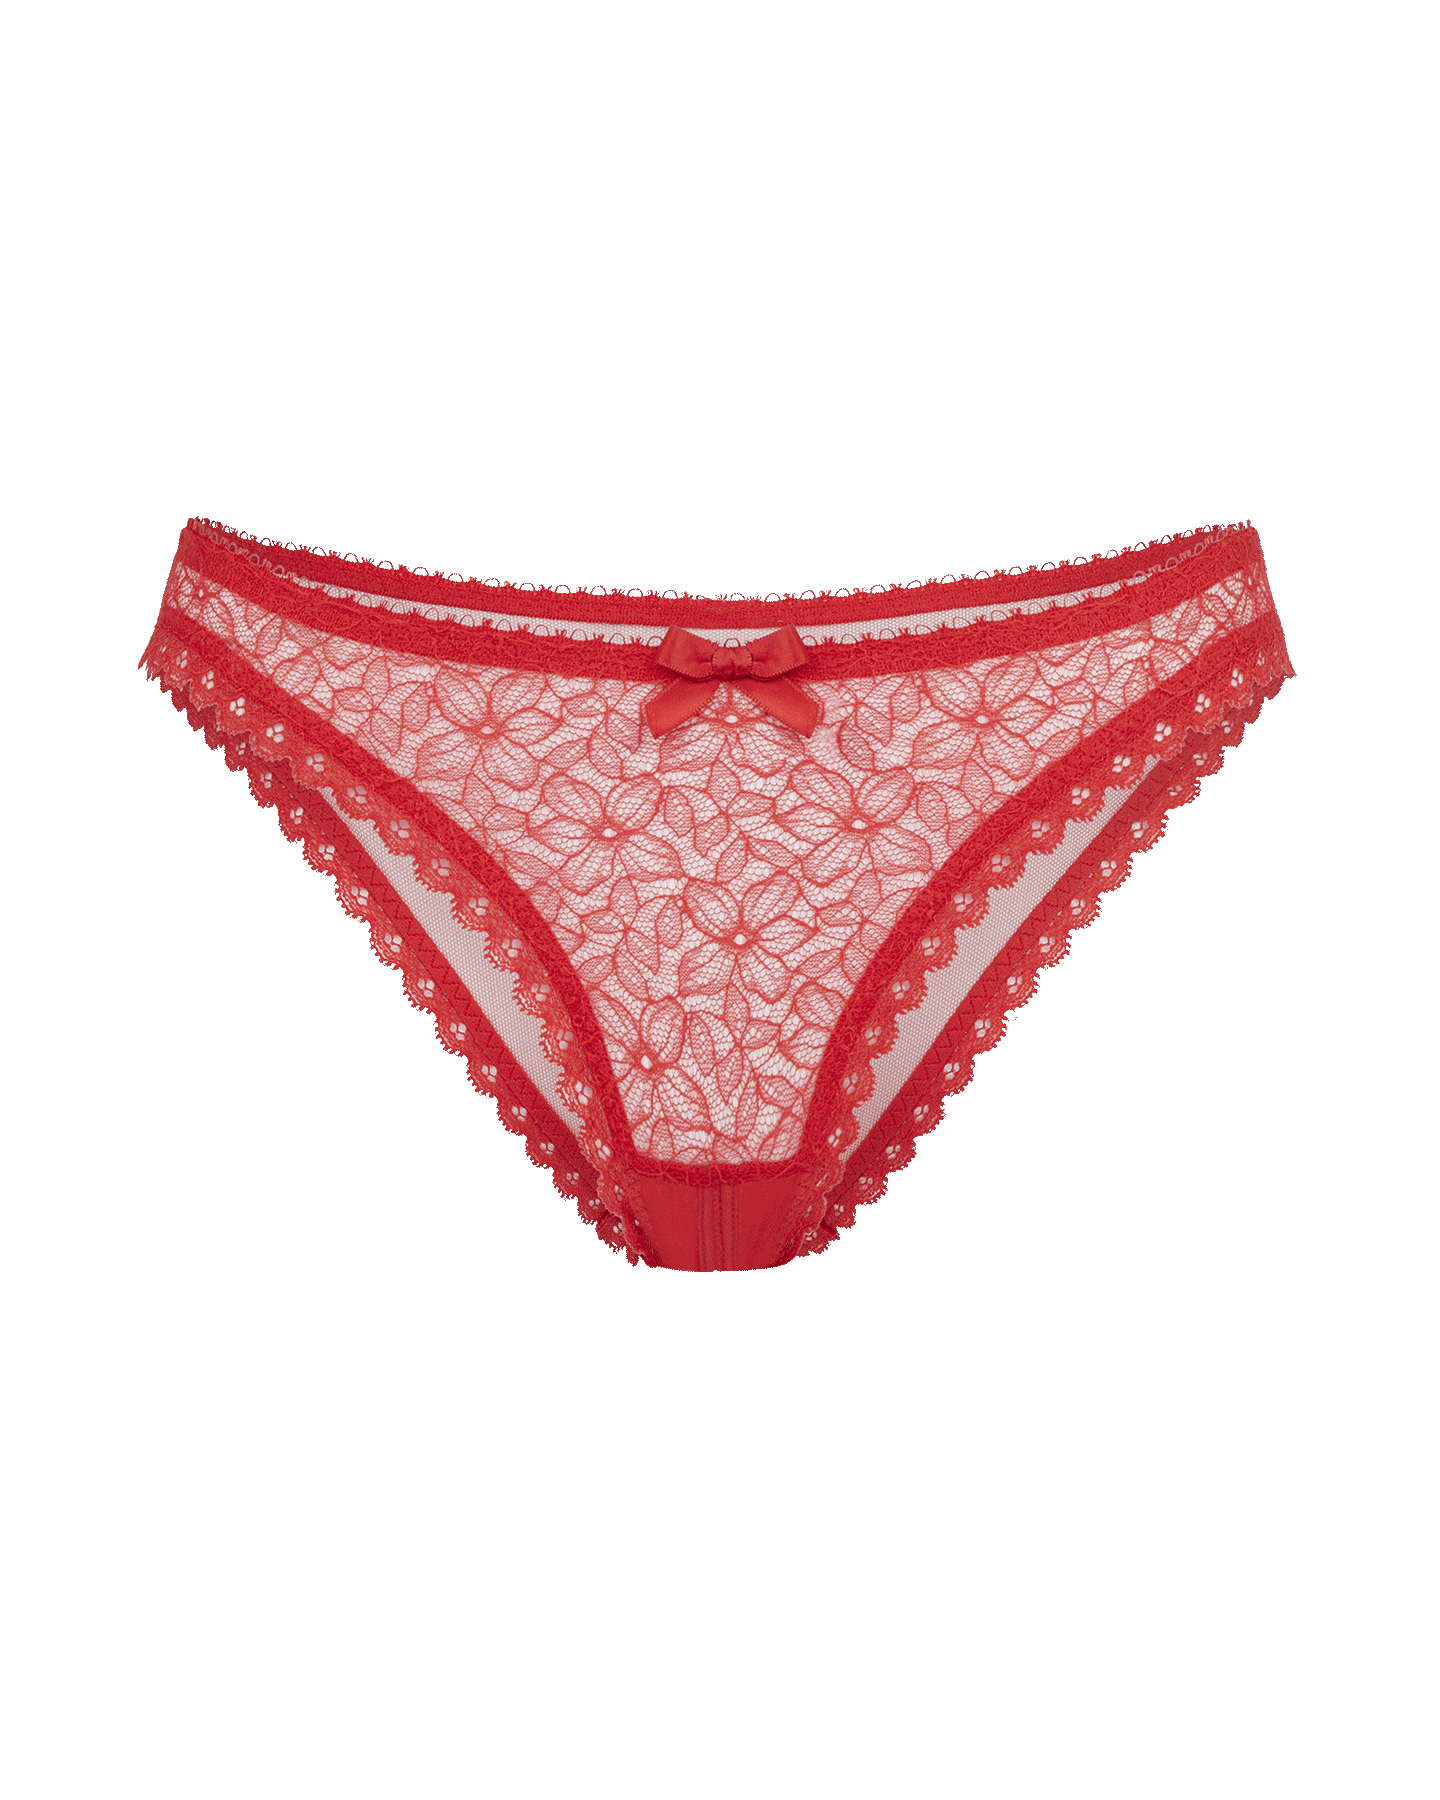 Women`s Erotic Lingerie on White Surface. Red Lacy Underwear on